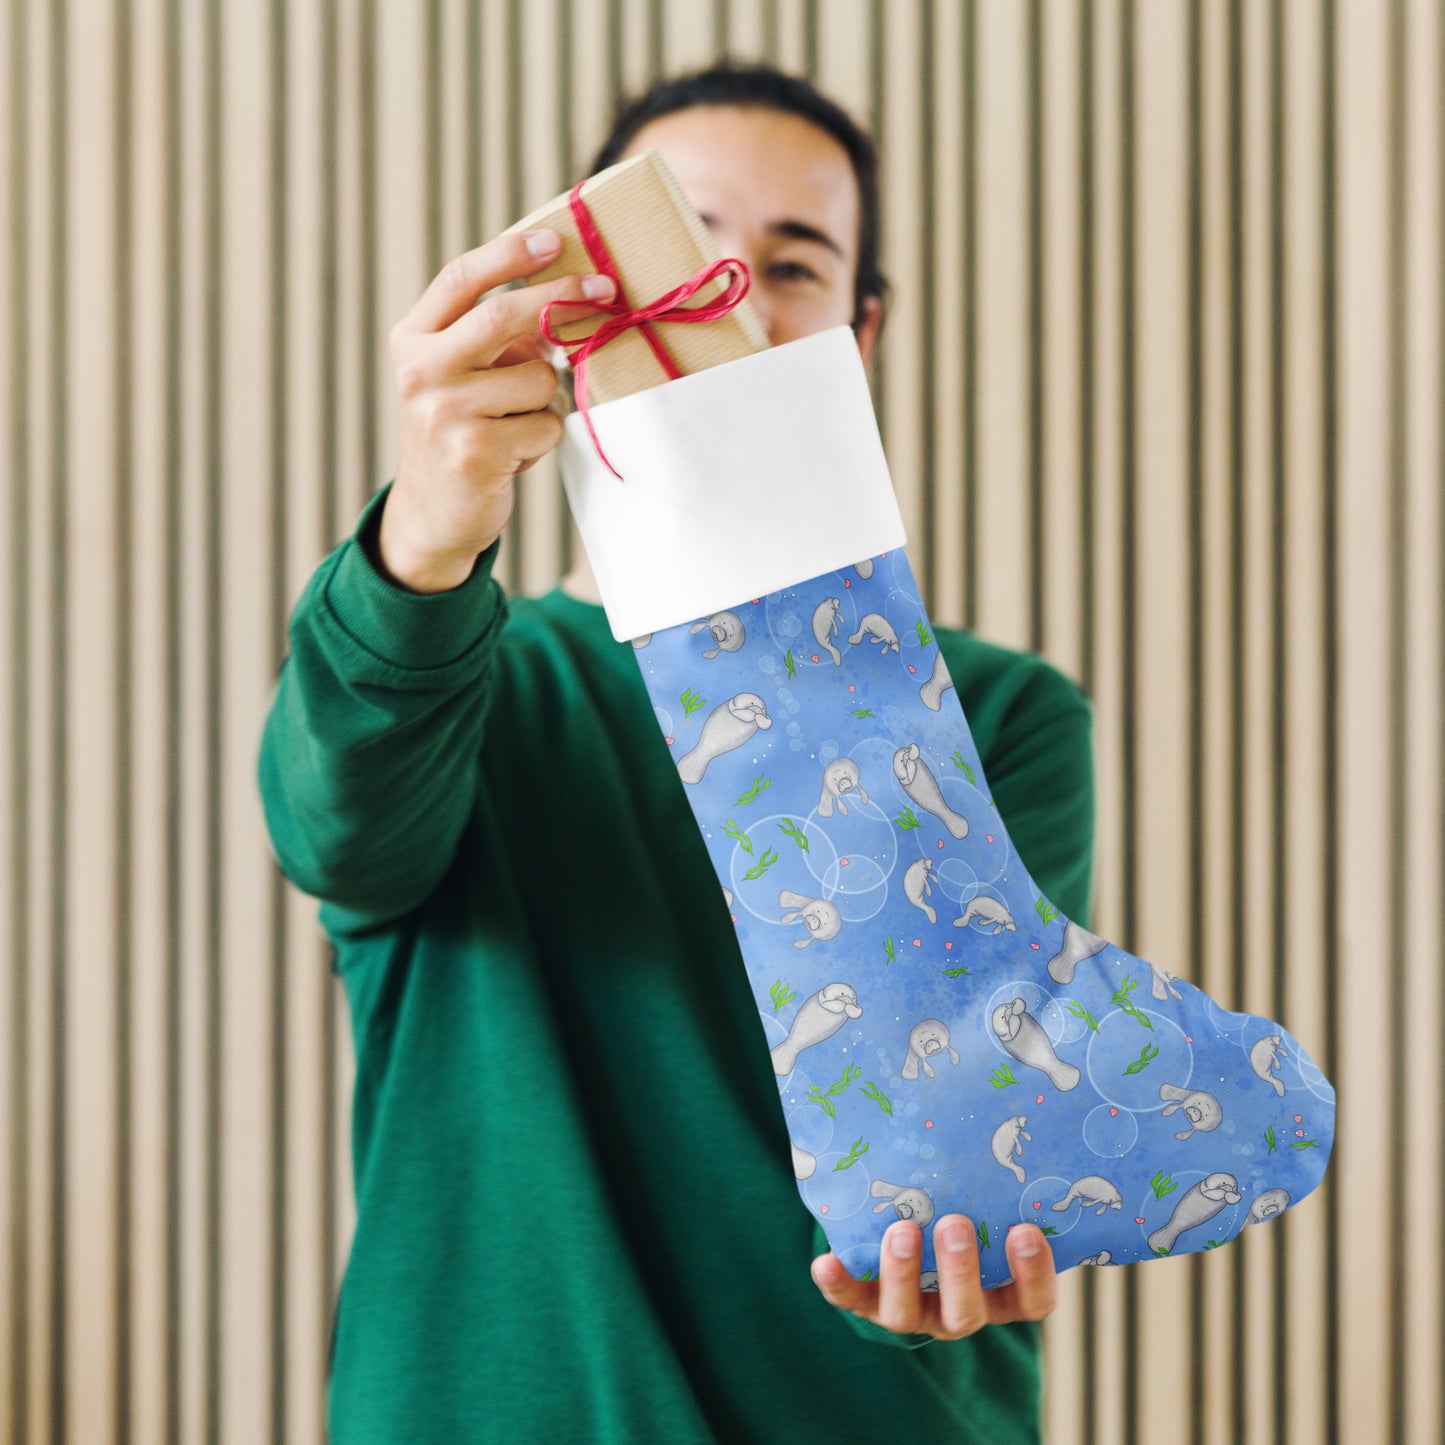 Limited Edition Manatee Christmas Stocking.  7 by 18 inches. The front has a hand-illustrated manatee design with an off-white polyester fabric on the back. It has a white fold-over cuff and a loop for hanging. Shown being held by male model.